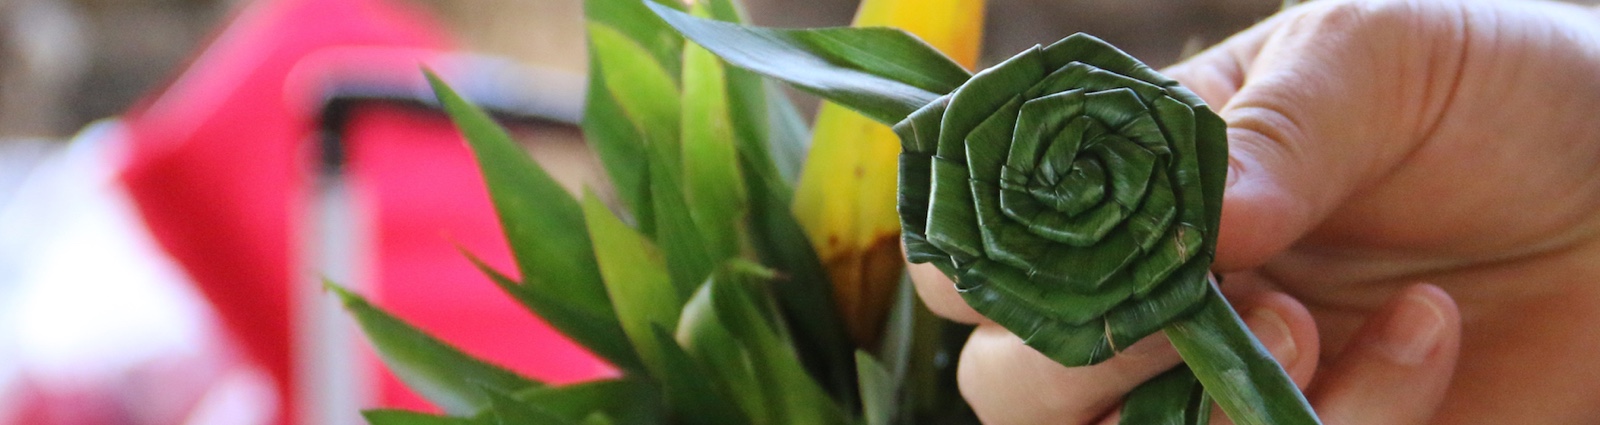 A person holding a Ti leaf rose